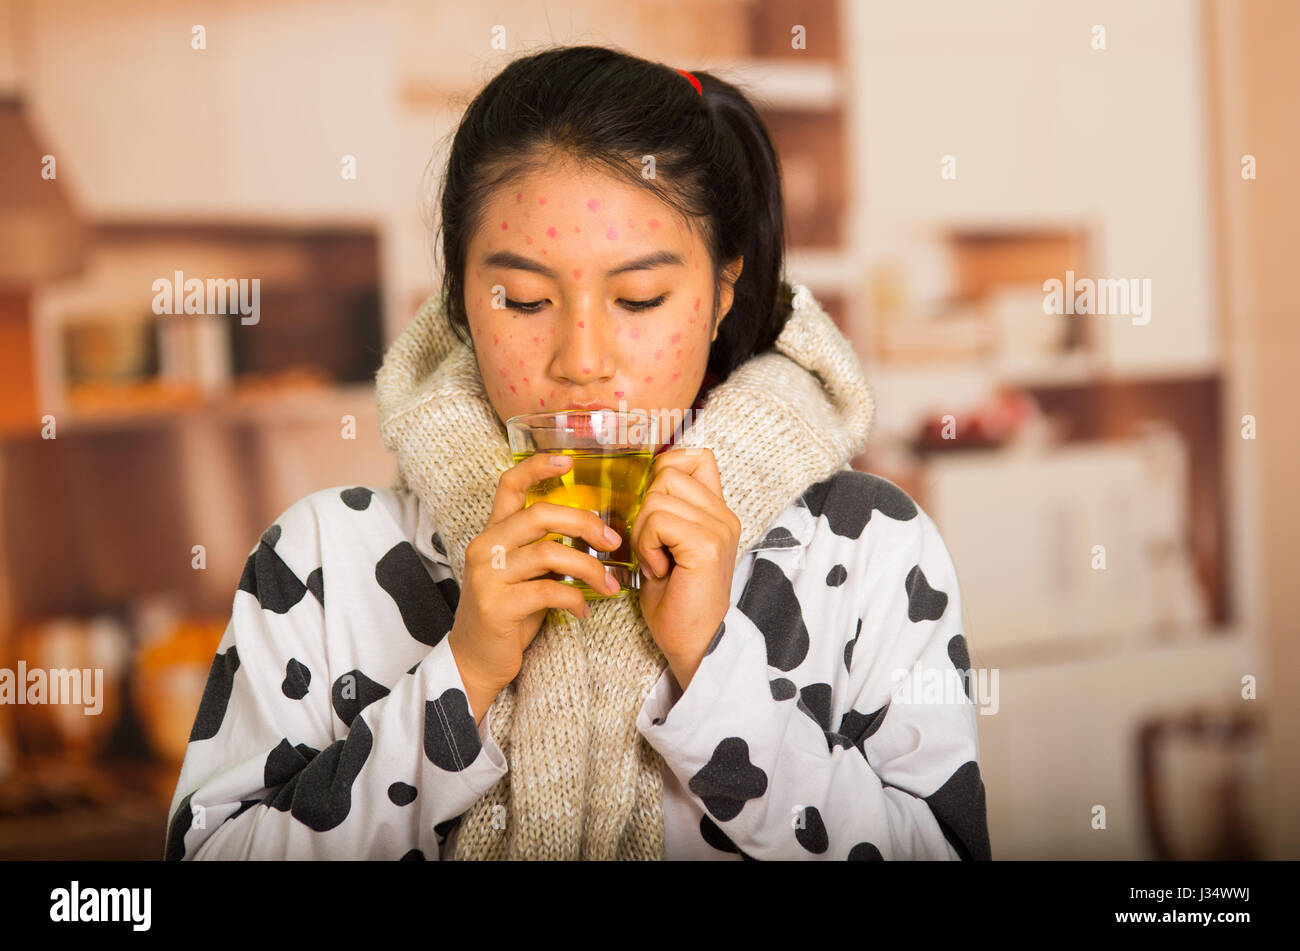 Portrait of young girl with skin problem drinking a cup of te with a grey towel around her neck Stock Photo